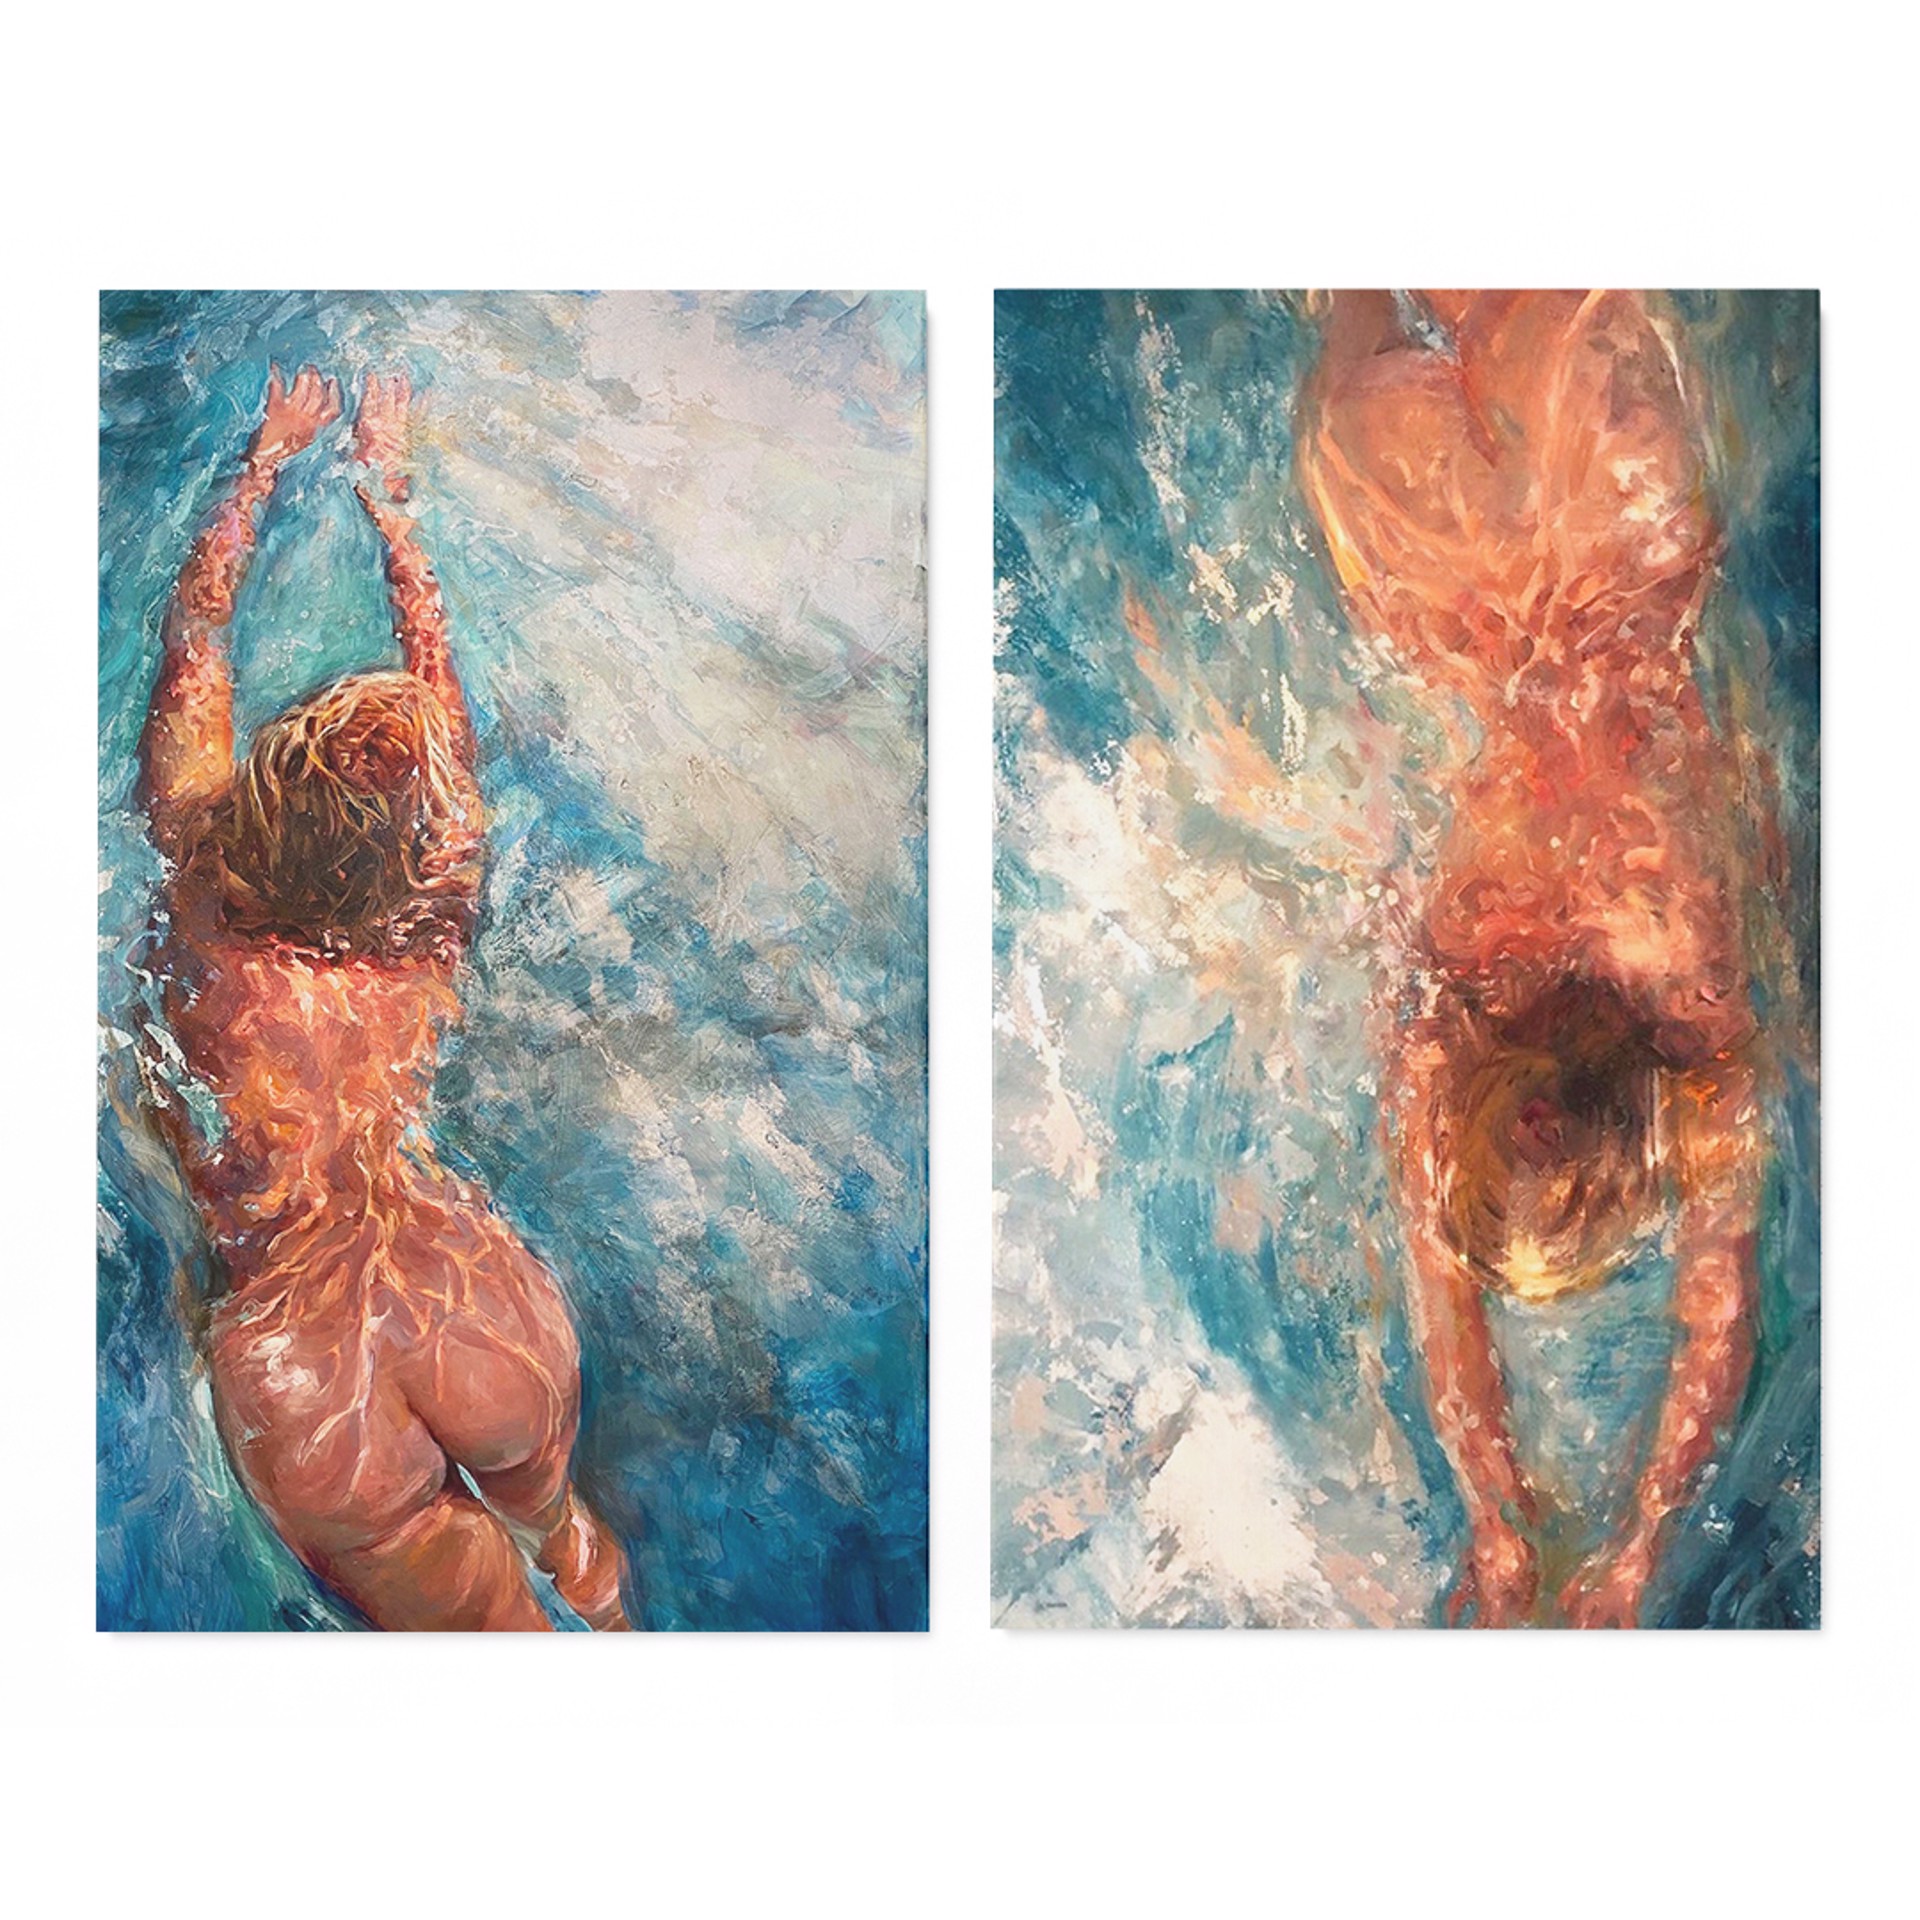 The Swimmers (diptych) by Nicole Etienne